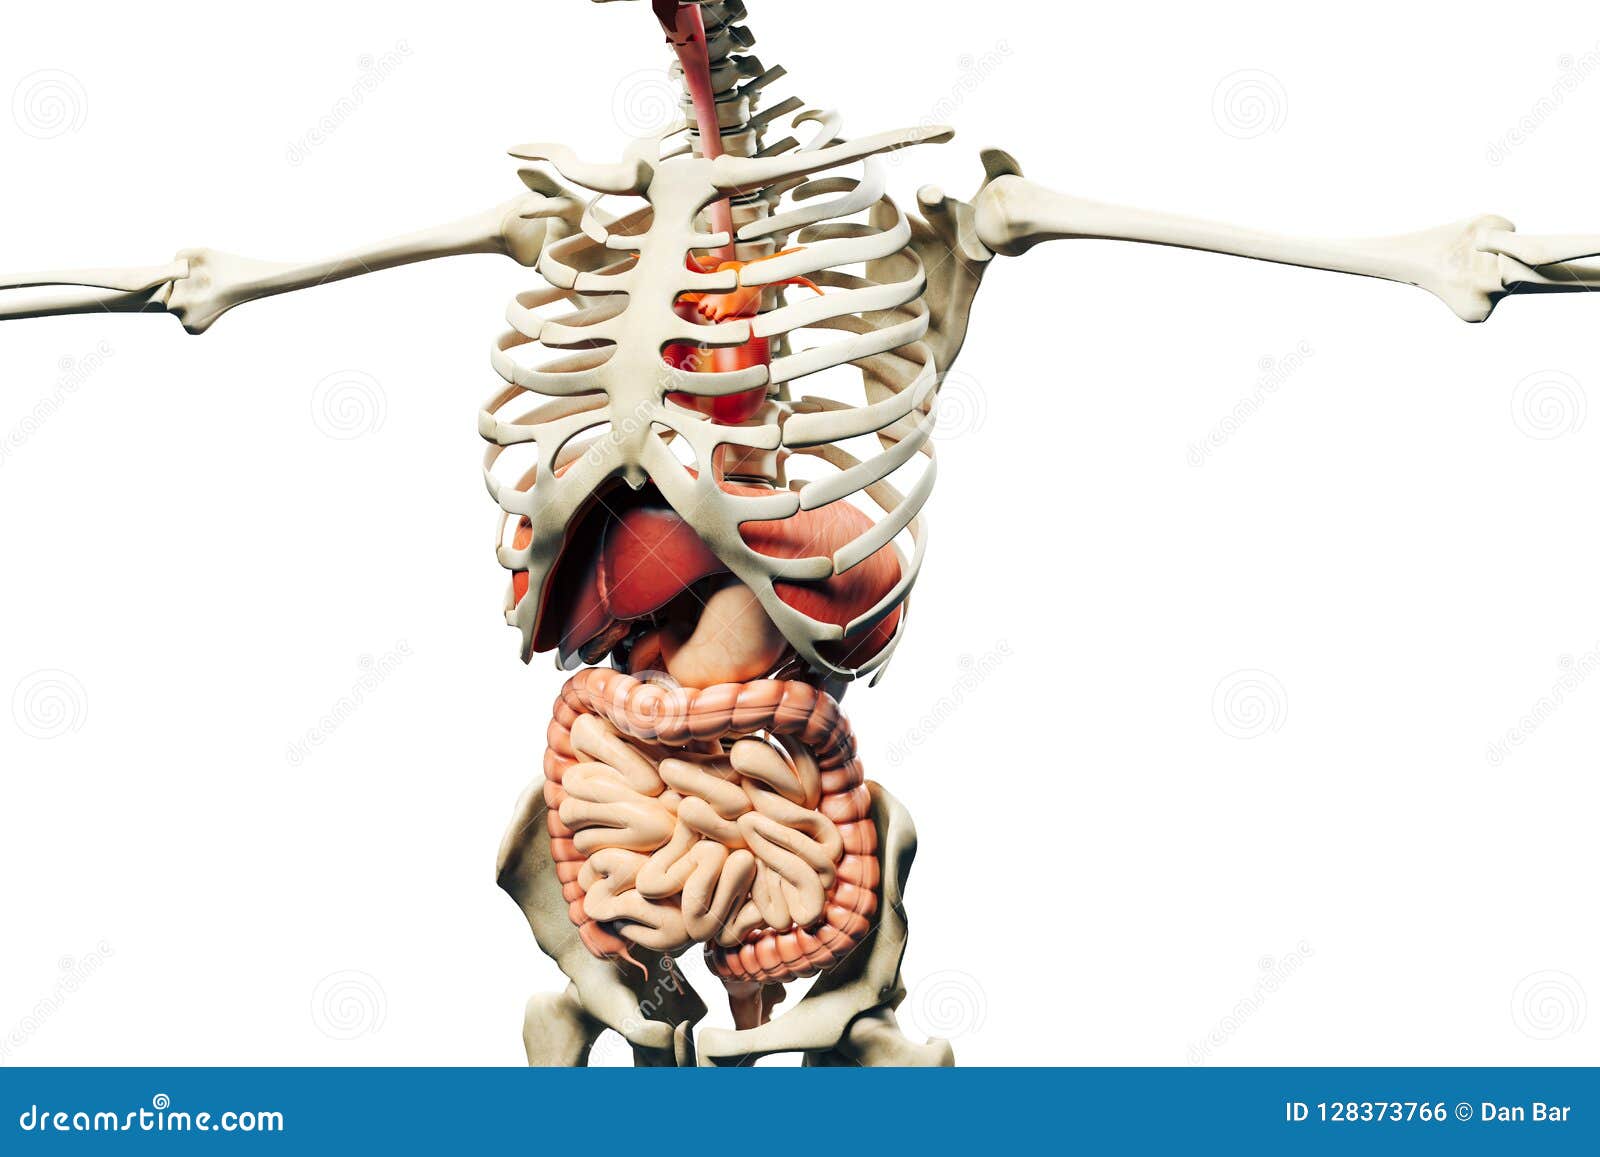 3d Render of Human Skeleton Showing Muscles and Internal Organs Stock ...